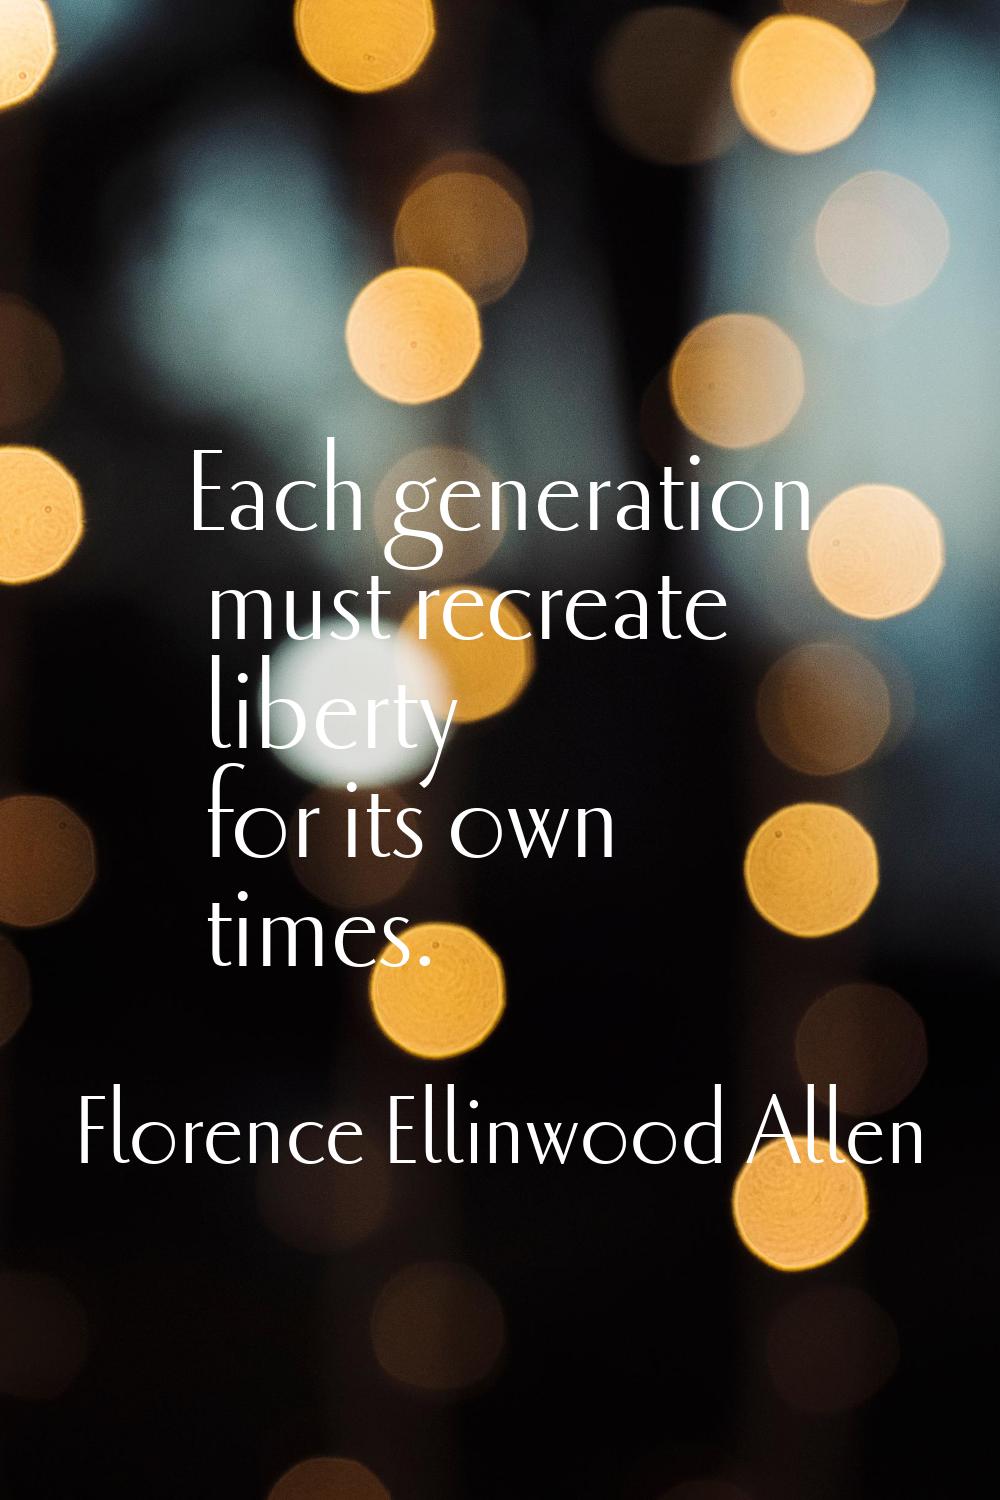 Each generation must recreate liberty for its own times.